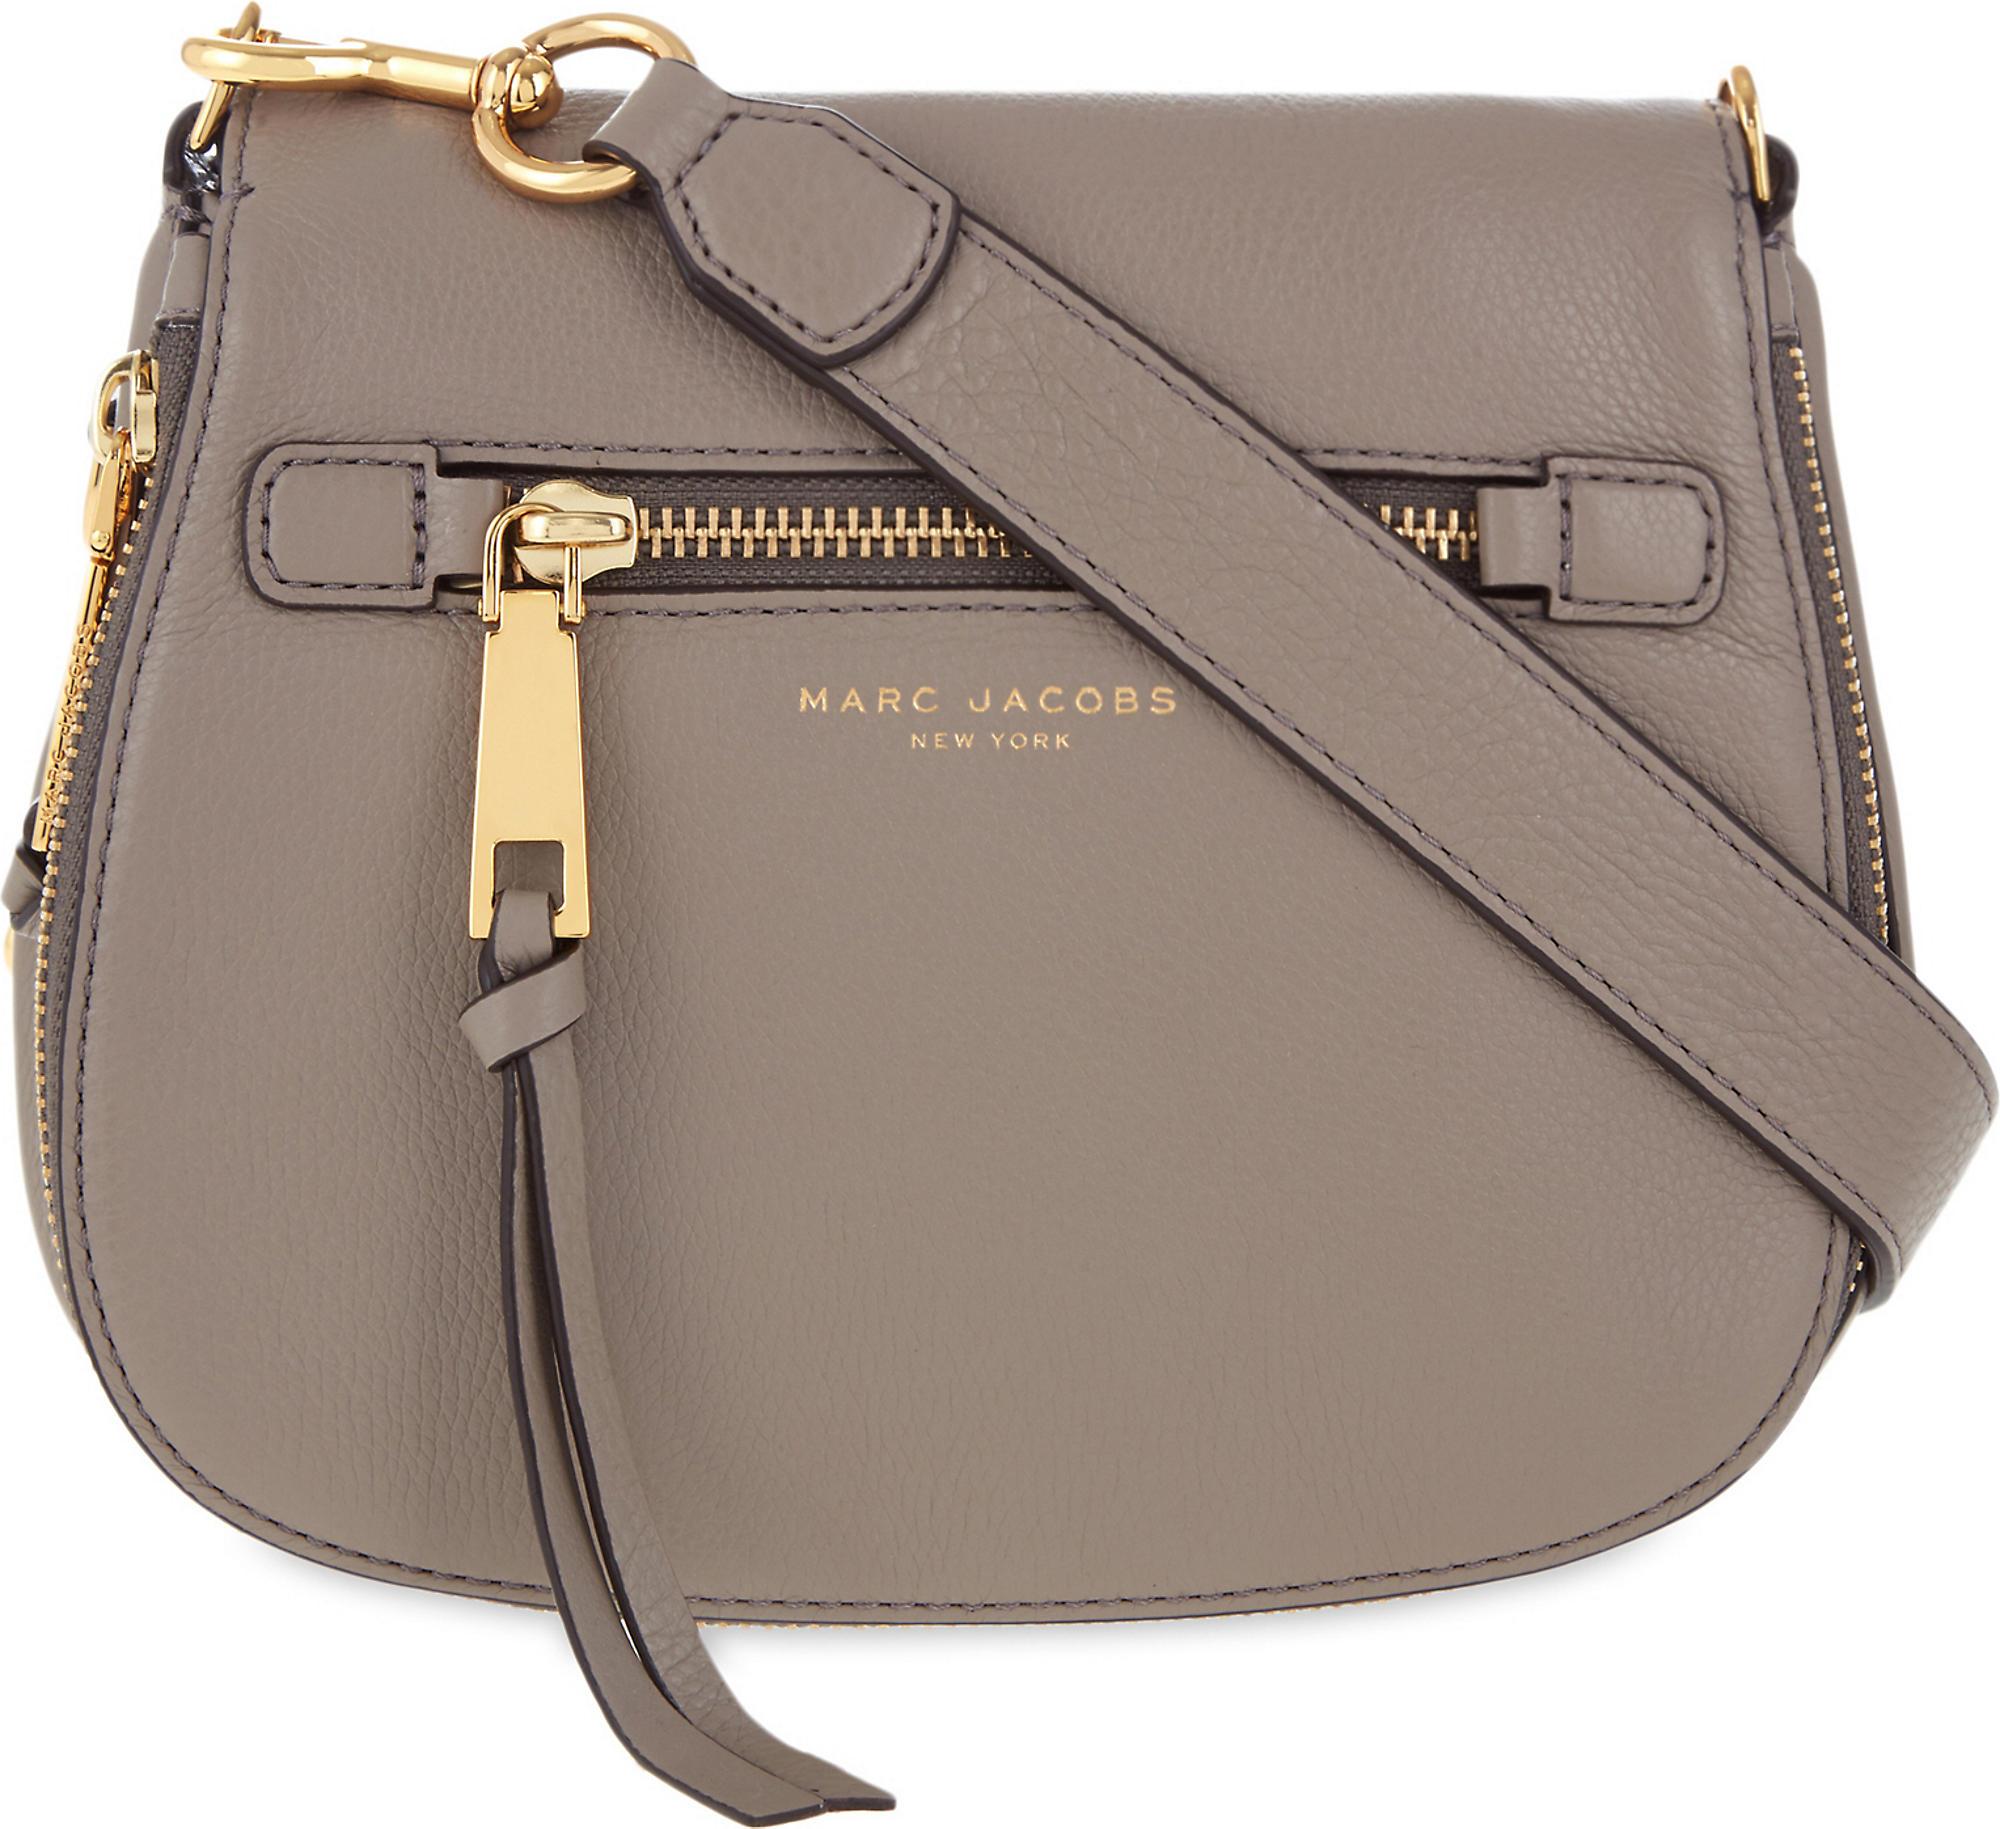 MARC JACOBS: The Snapshot Cane bag in grained leather - Black